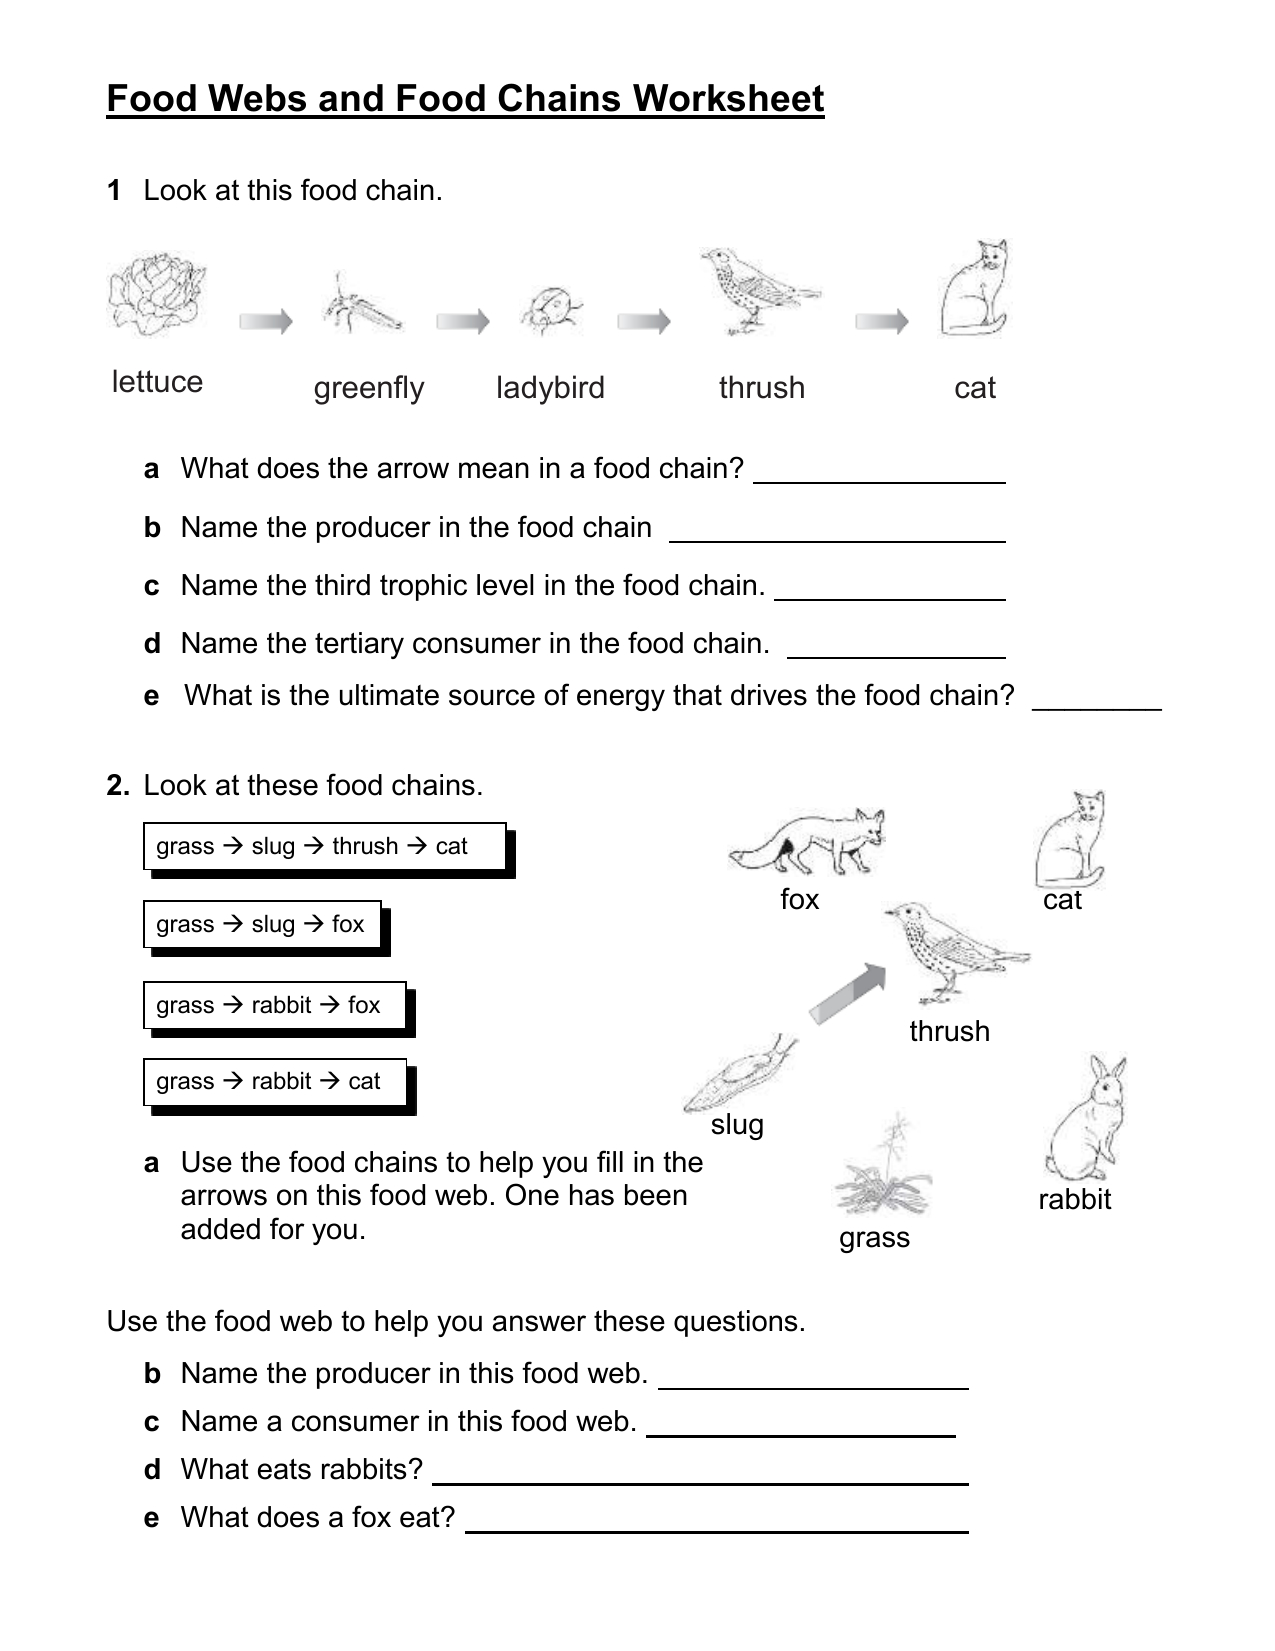 Act Food Webs And Food Chains Worksheet With Food Webs And Food Chains Worksheet